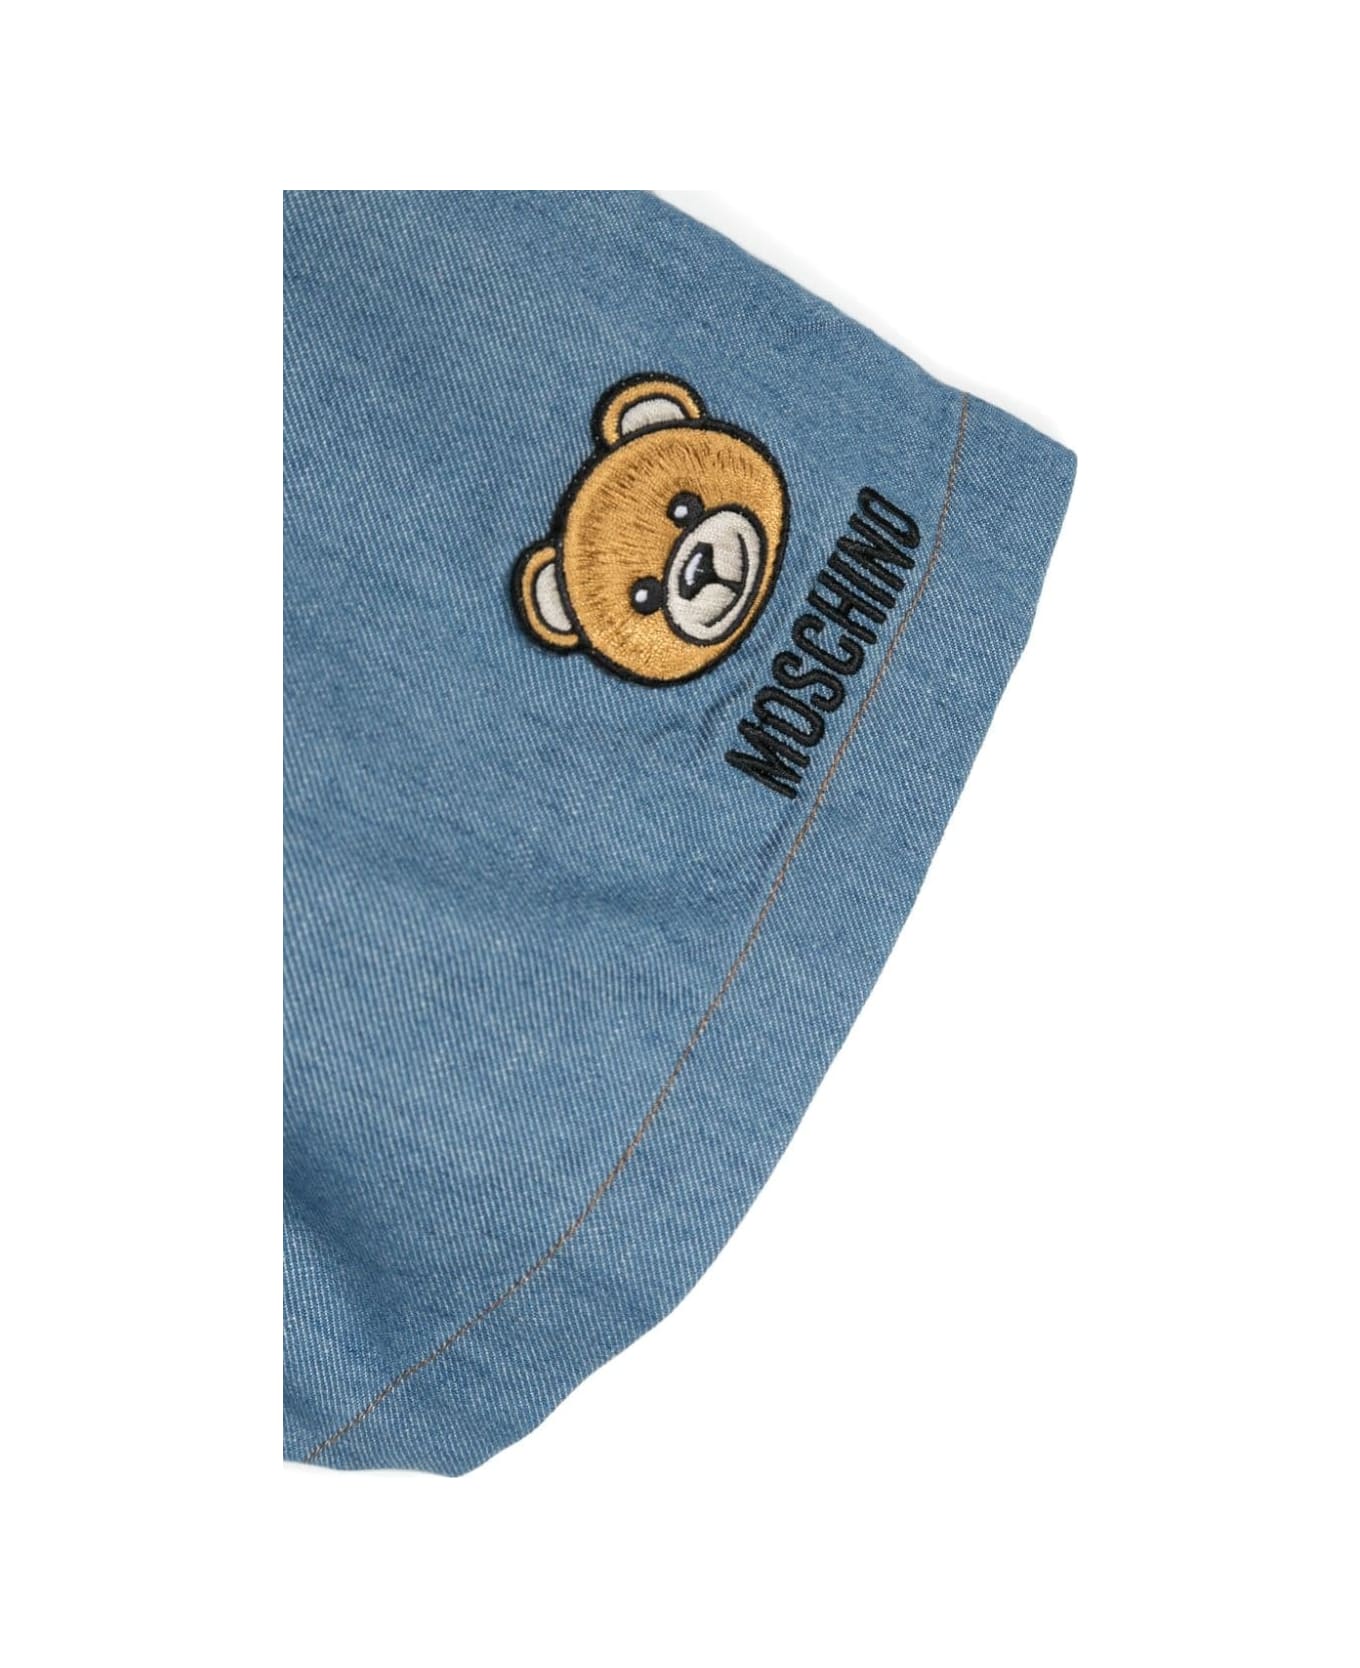 Moschino Blue Short Jumpsuit With Moschino Teddy Bear - Blue ワンピース＆ドレス